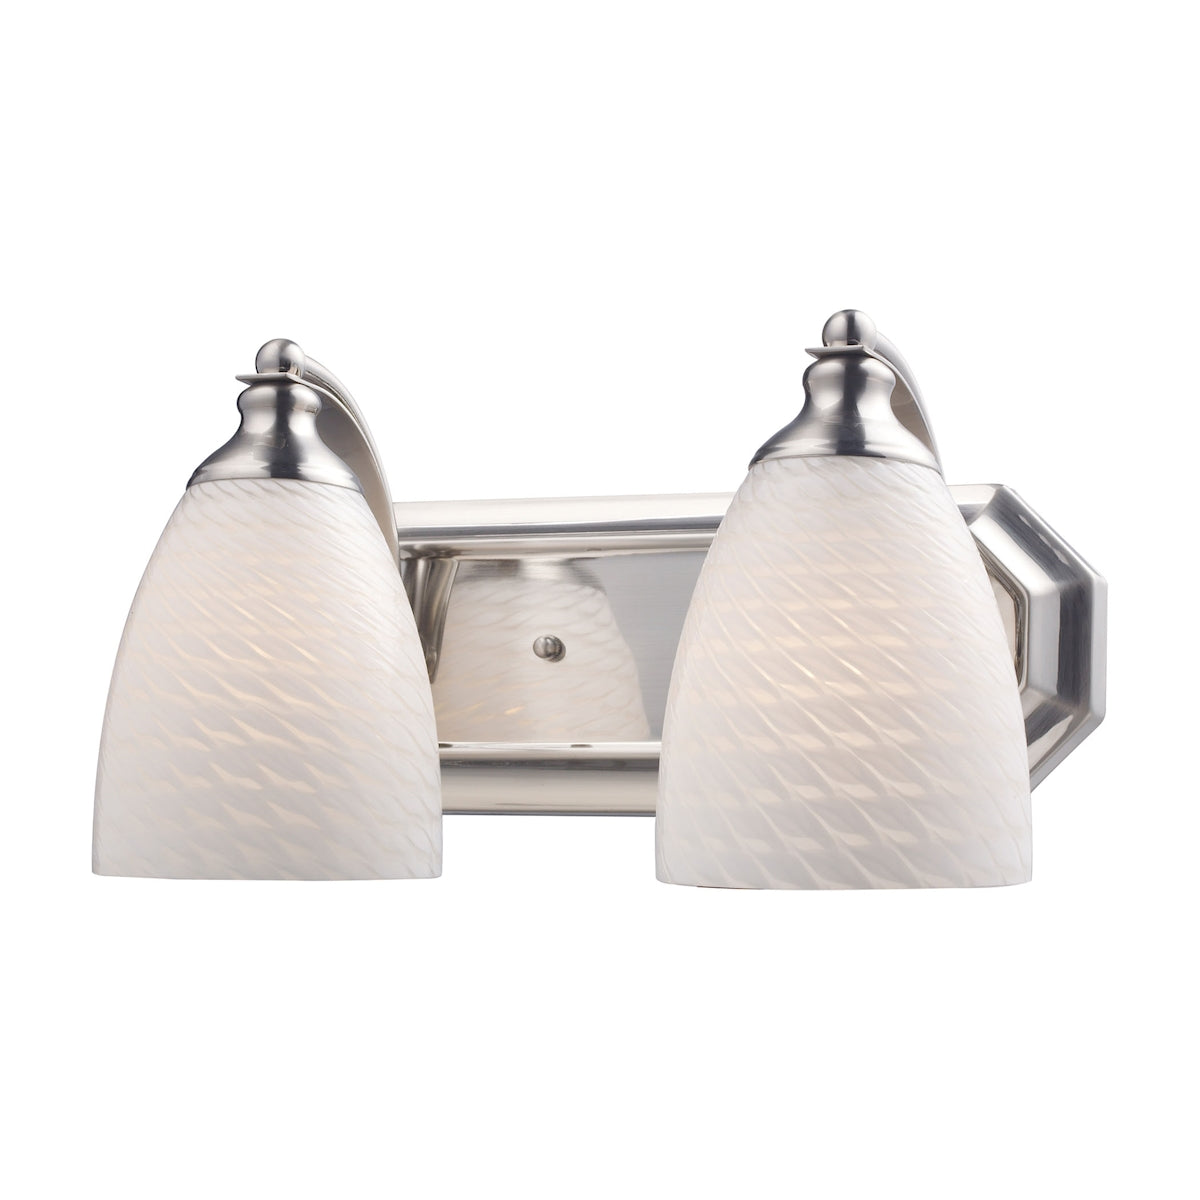 Mix-N-Match Vanity 2-Light Wall Lamp in Satin Nickel with White Swirl Glass